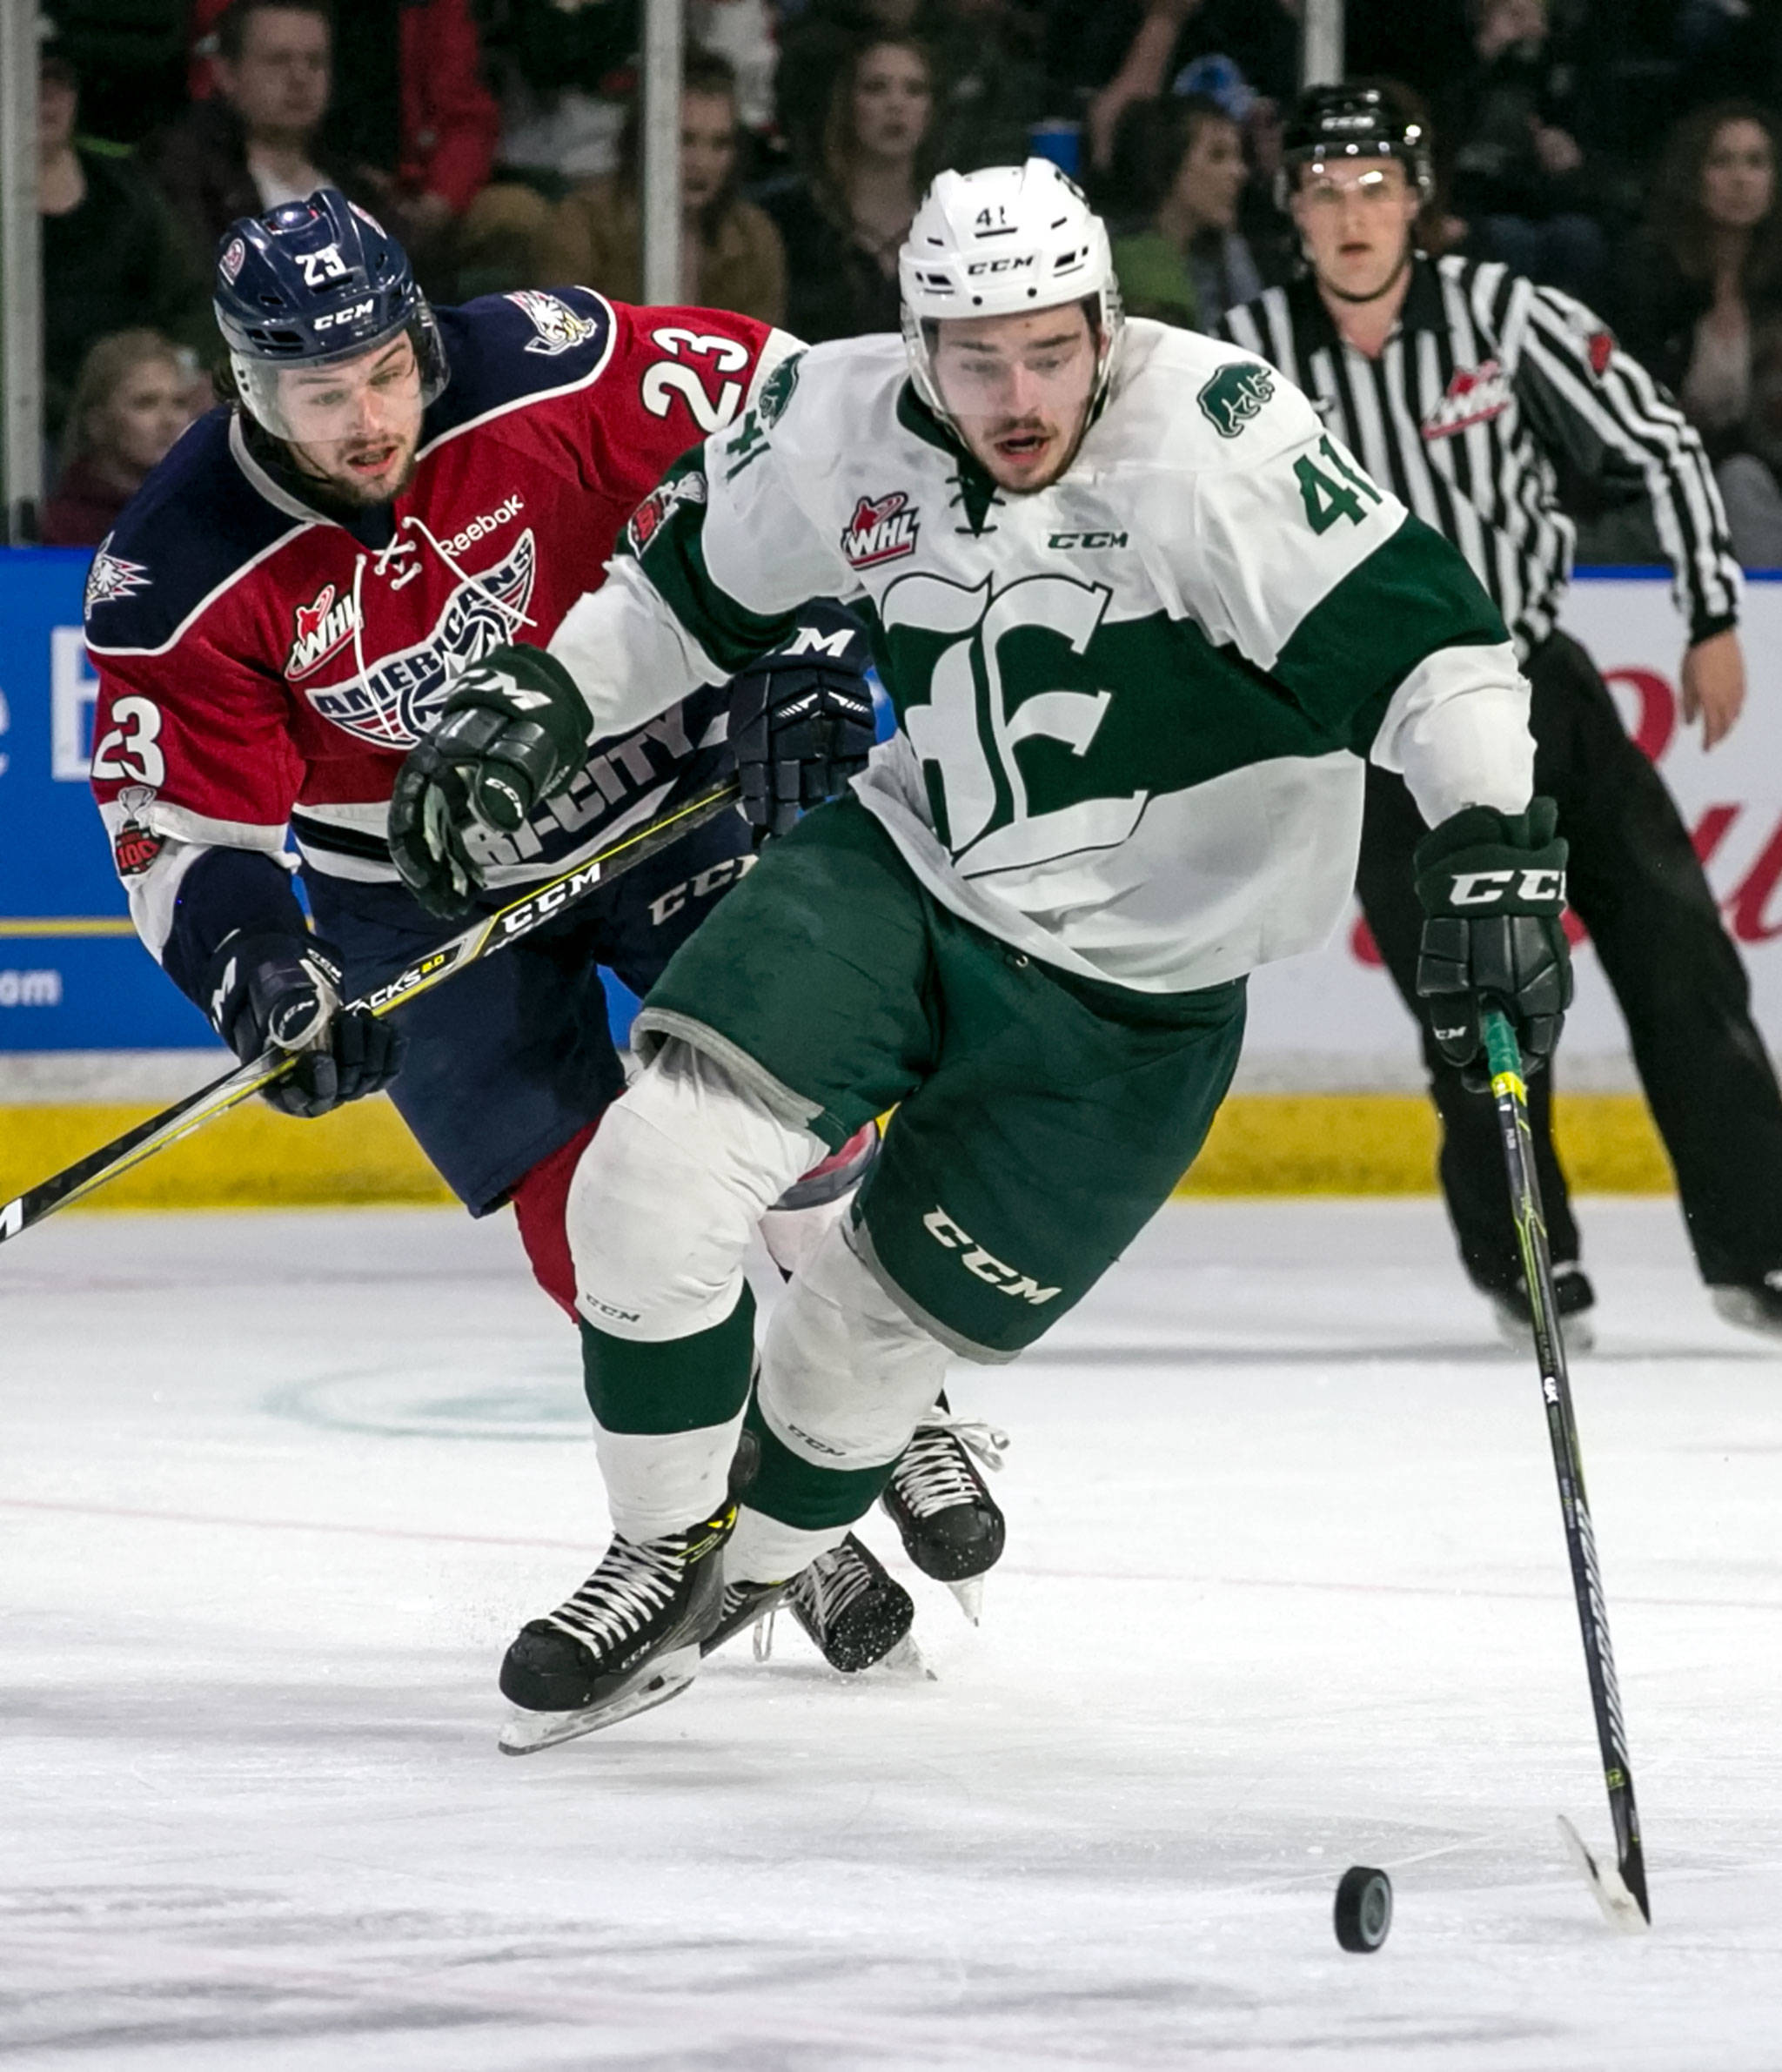 The Silvertips’ Garrett Pilon chases down the puck with the Americans’ Isaac Johnson trailing during Game 1 of the Westernce Conference finals on April 20, 2018, at Angel of the Winds Arena in Everett. (Kevin Clark / The Herald)